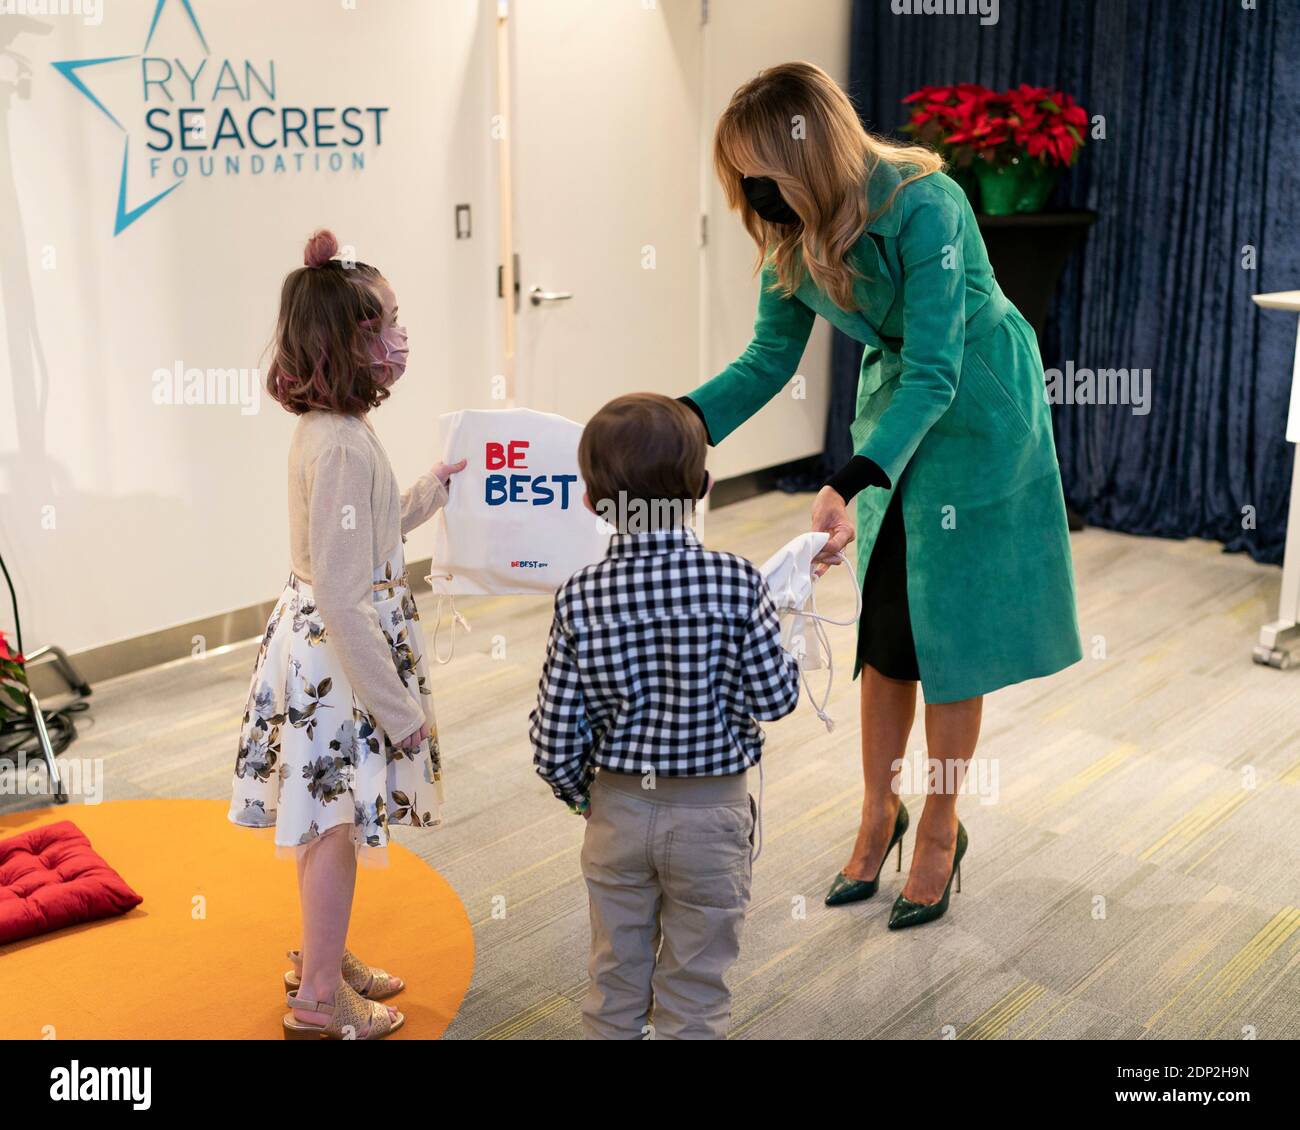 Washington, United States Of America. 15th Dec, 2020. U.S. First Lady Melania Trump hands BeBest gifts to 8 year-old patient Sofia Martinez and 6 year-old patient Riley Whitney during a Christmas visit to Children's National Hospital December 15, 2020 in Washington, DC Credit: Planetpix/Alamy Live News Stock Photo